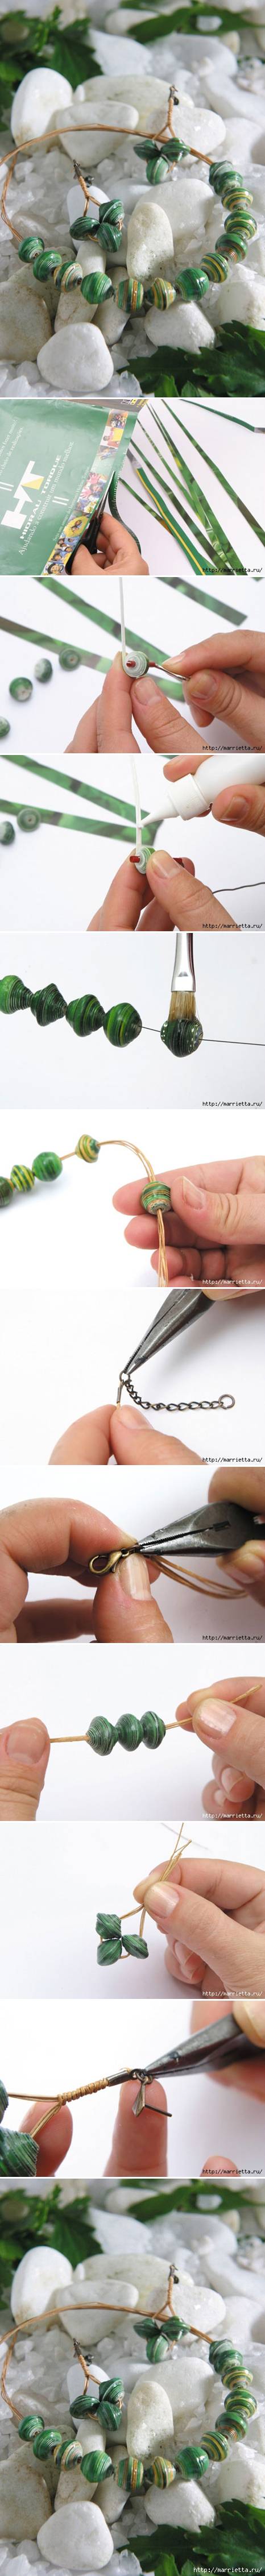 How-to-use-Magazine-to-make-jewelry-feel-necklaces-and-Earrings-step-by-step-DIY-tutorial-instructions